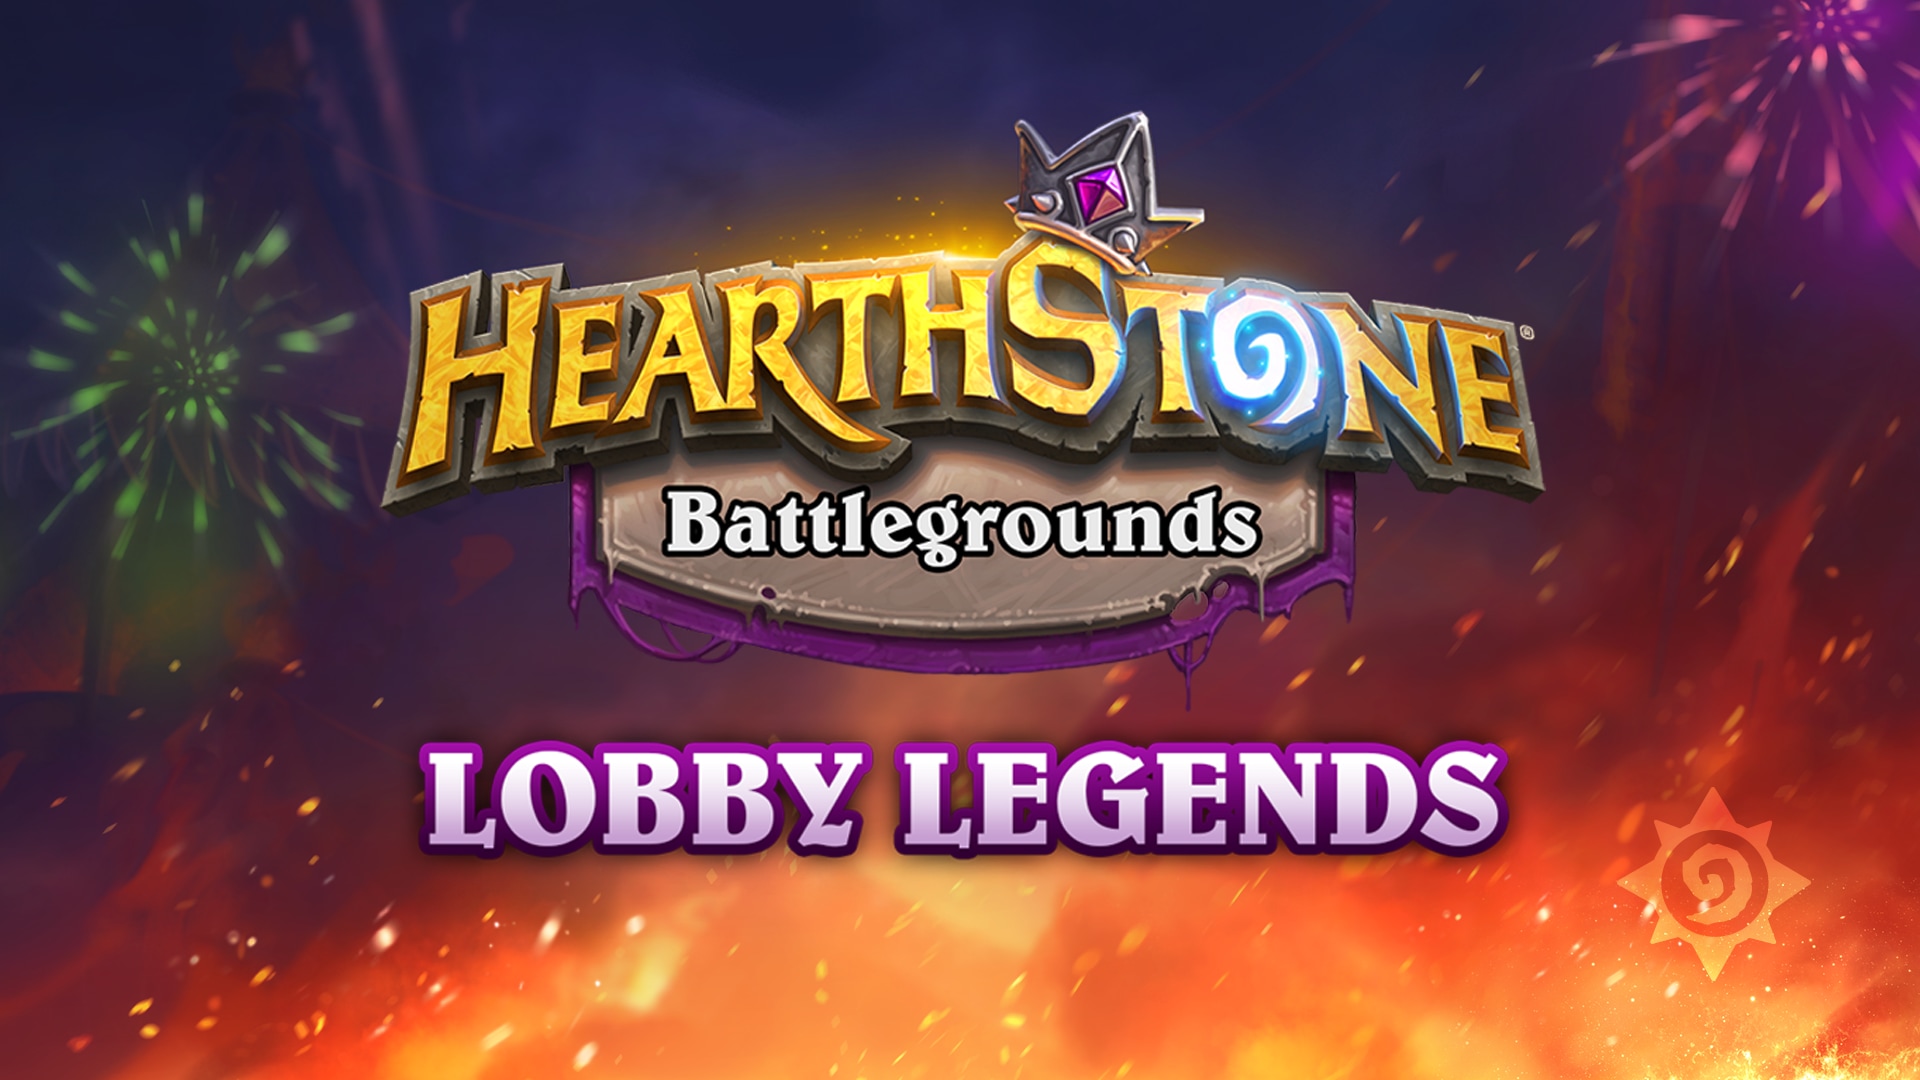 The Fire Festival Spreads to Battlegrounds: Lobby Legends!